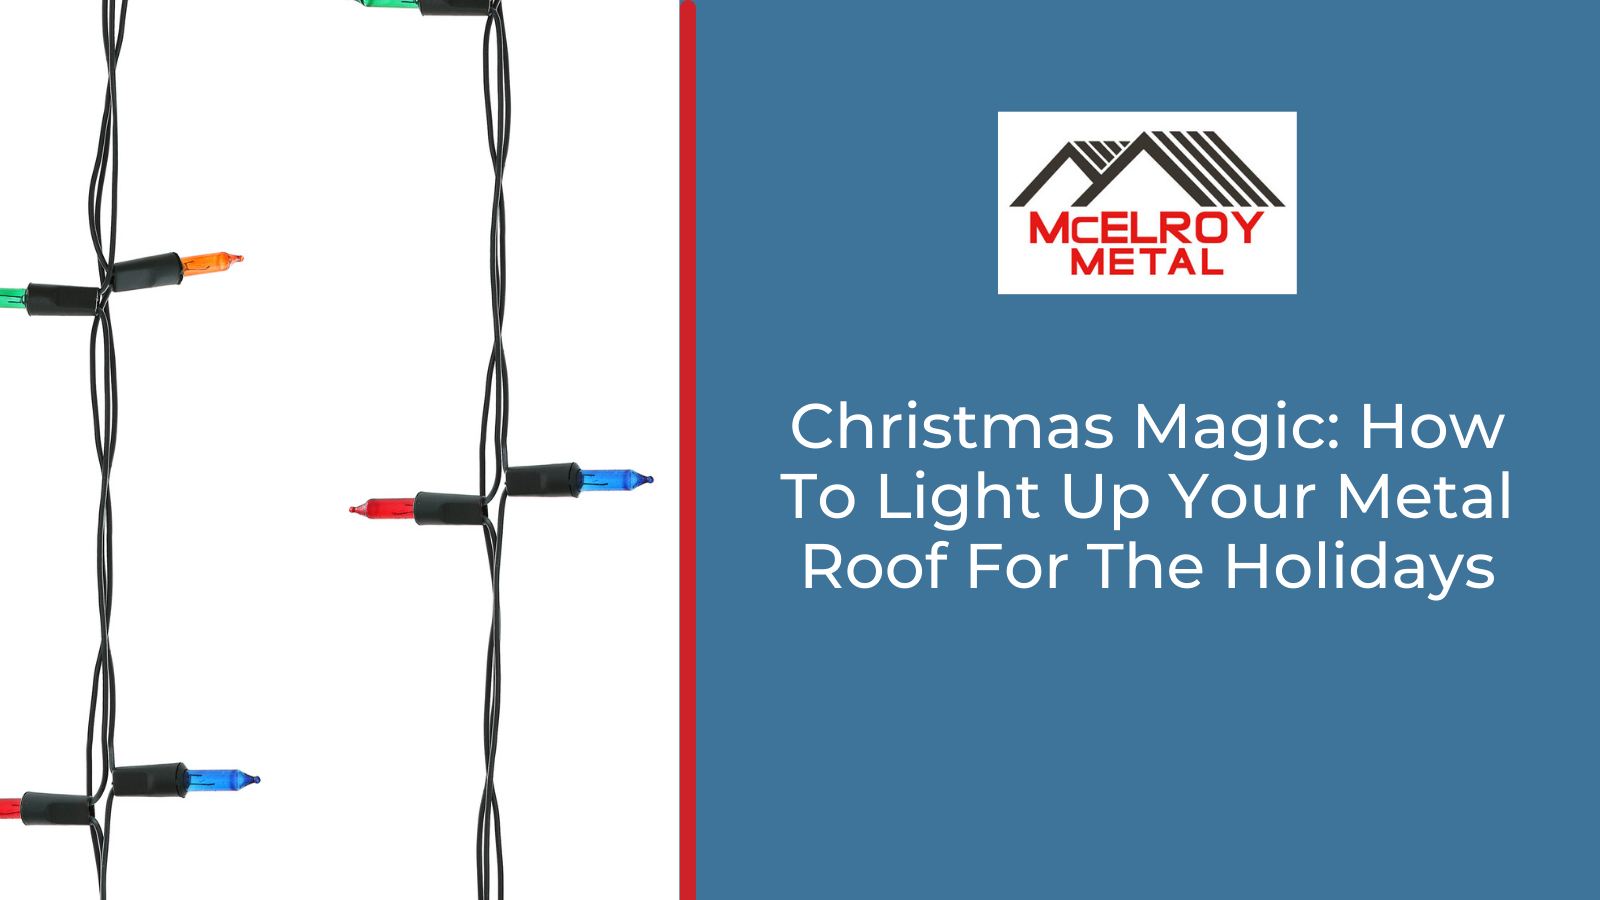 Christmas Magic: How To Light Up Your Metal Roof For The Holidays